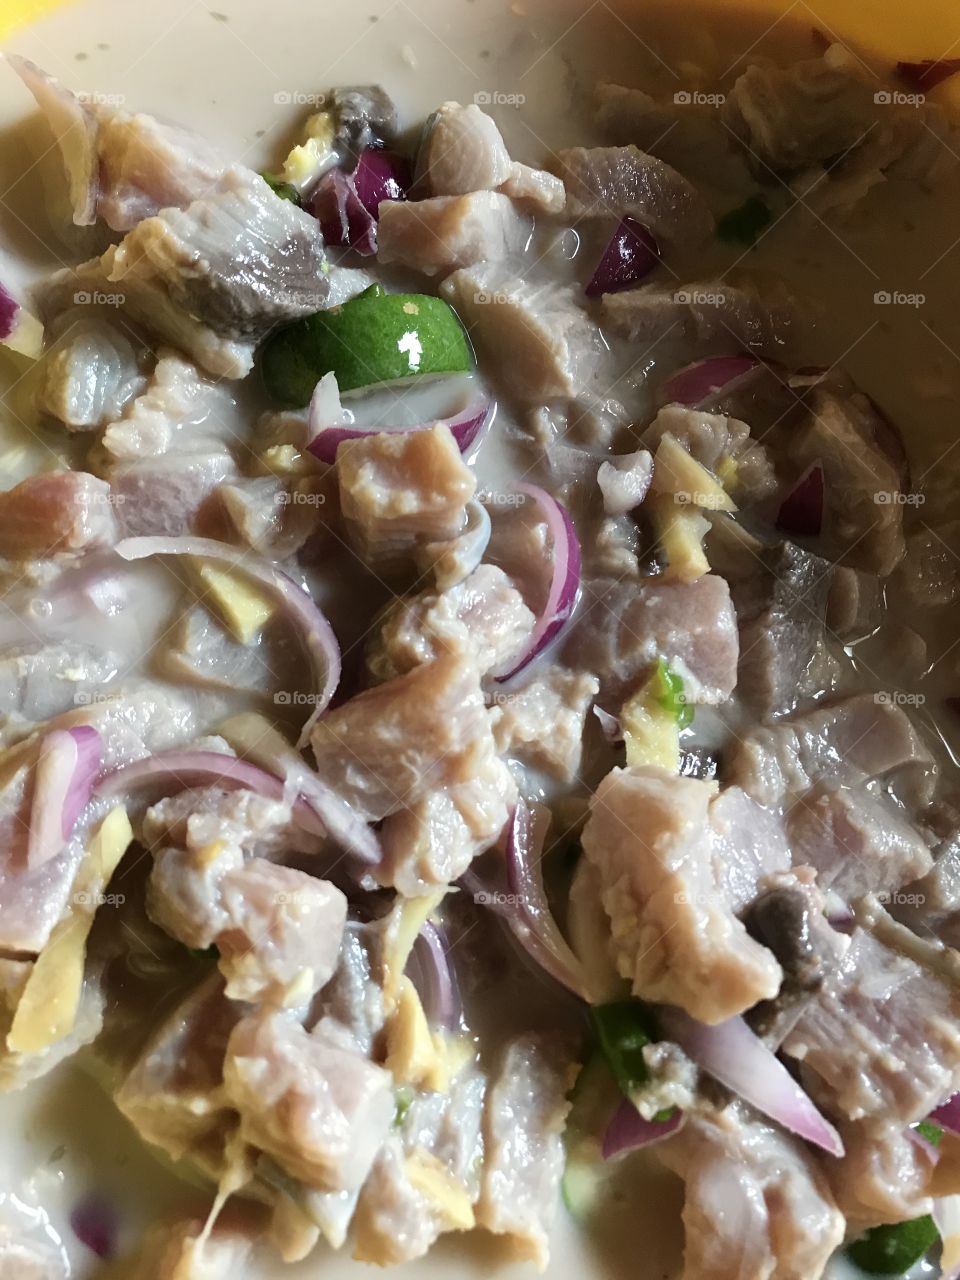 This is called "Kinilaw" for locals in the Philippines. Made with coconot vinegar, tuna, ginger, onions, lemon and the secret ingredient Tabon-tabon (Hydrophytune orbiculatum).